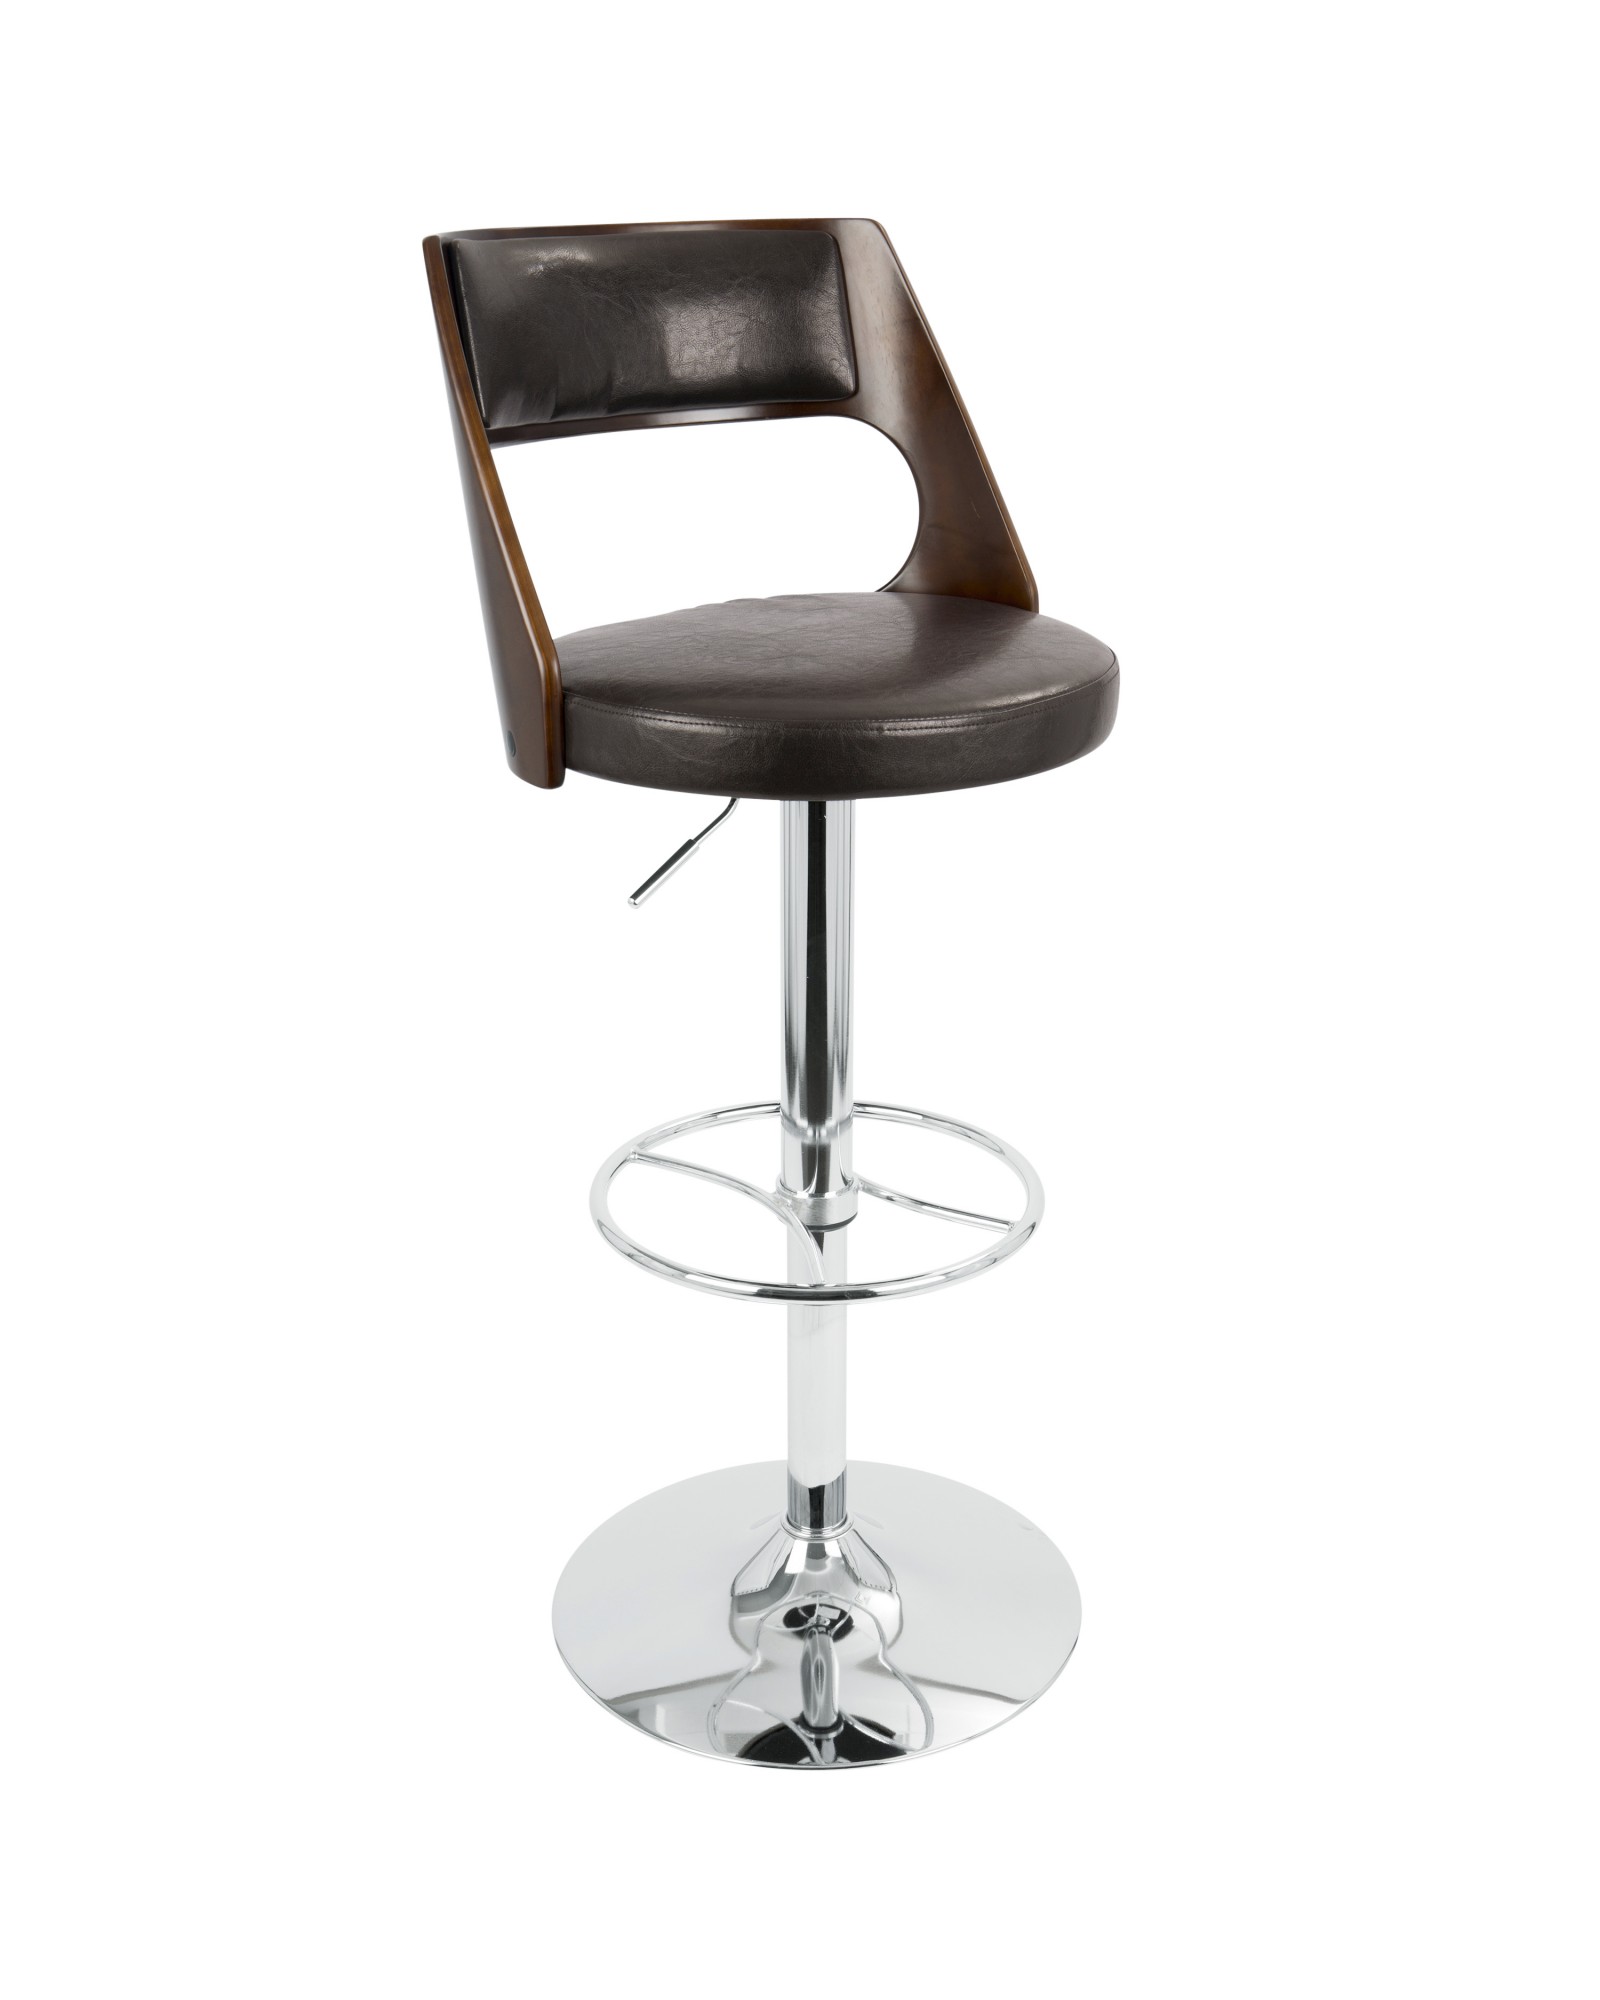 Presta Mid-Century Modern Adjustable Barstool with Swivel in Cherry and Brown Faux Leather